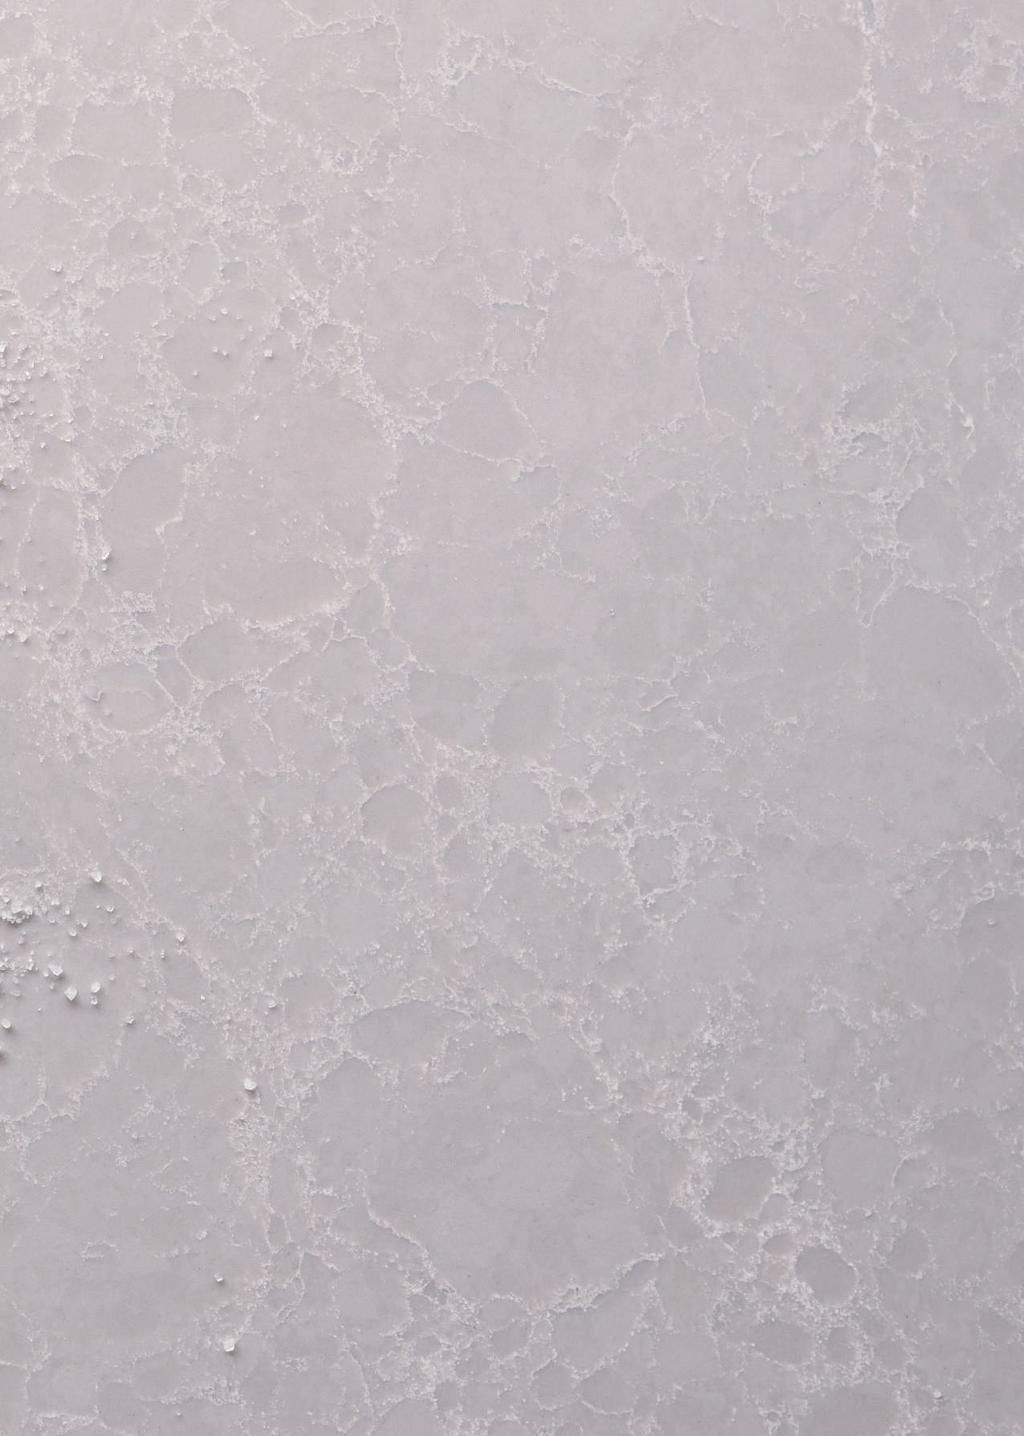 Where creativity meets quality The Virtue of Quartz Quartz is one of nature s strongest minerals, resistant to stains, scratches, cracks and heat and requires minimal maintenance.